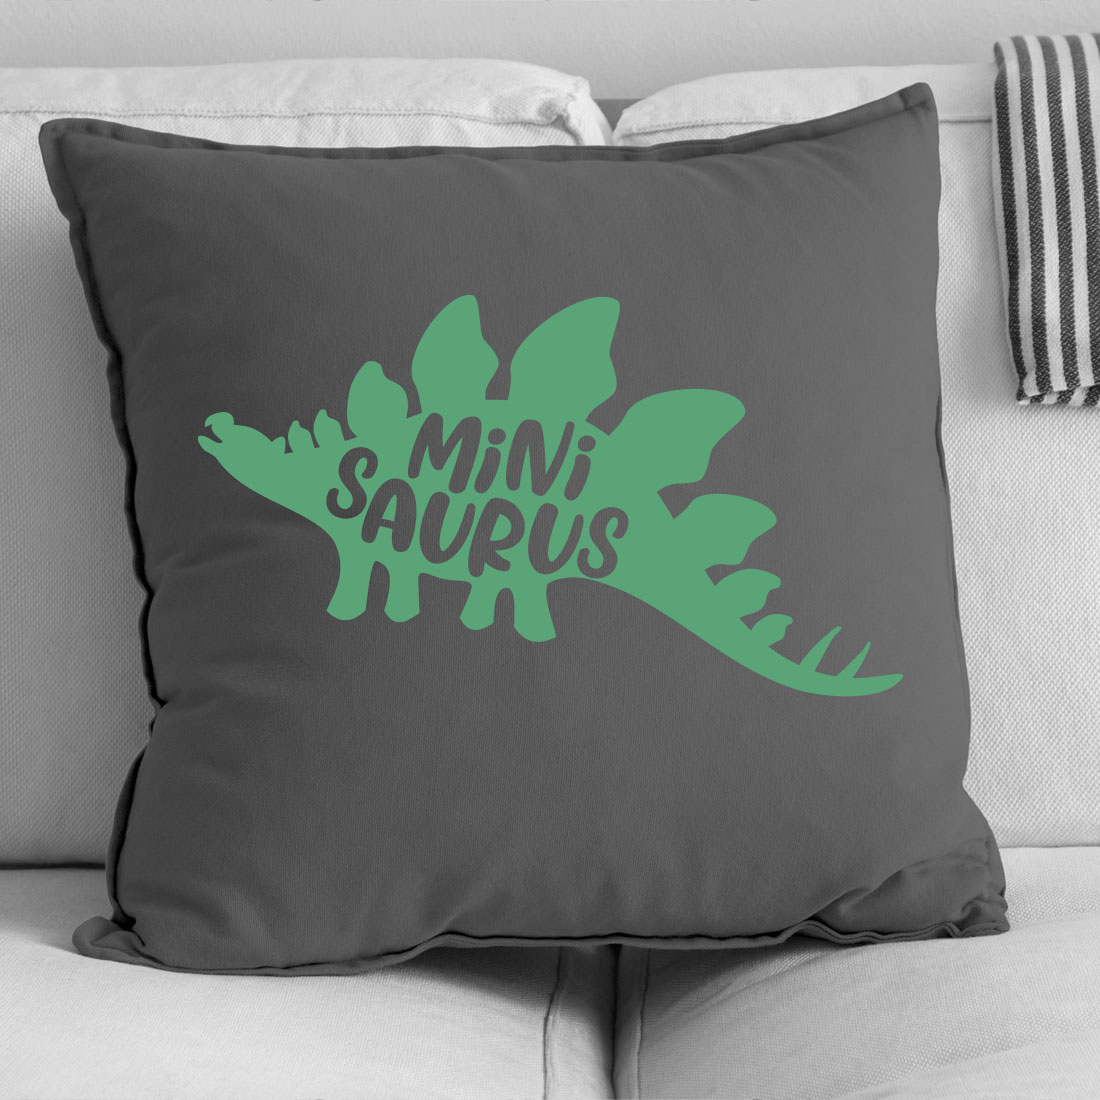 Black and white photo of a pillow with a green dinosaur on it.